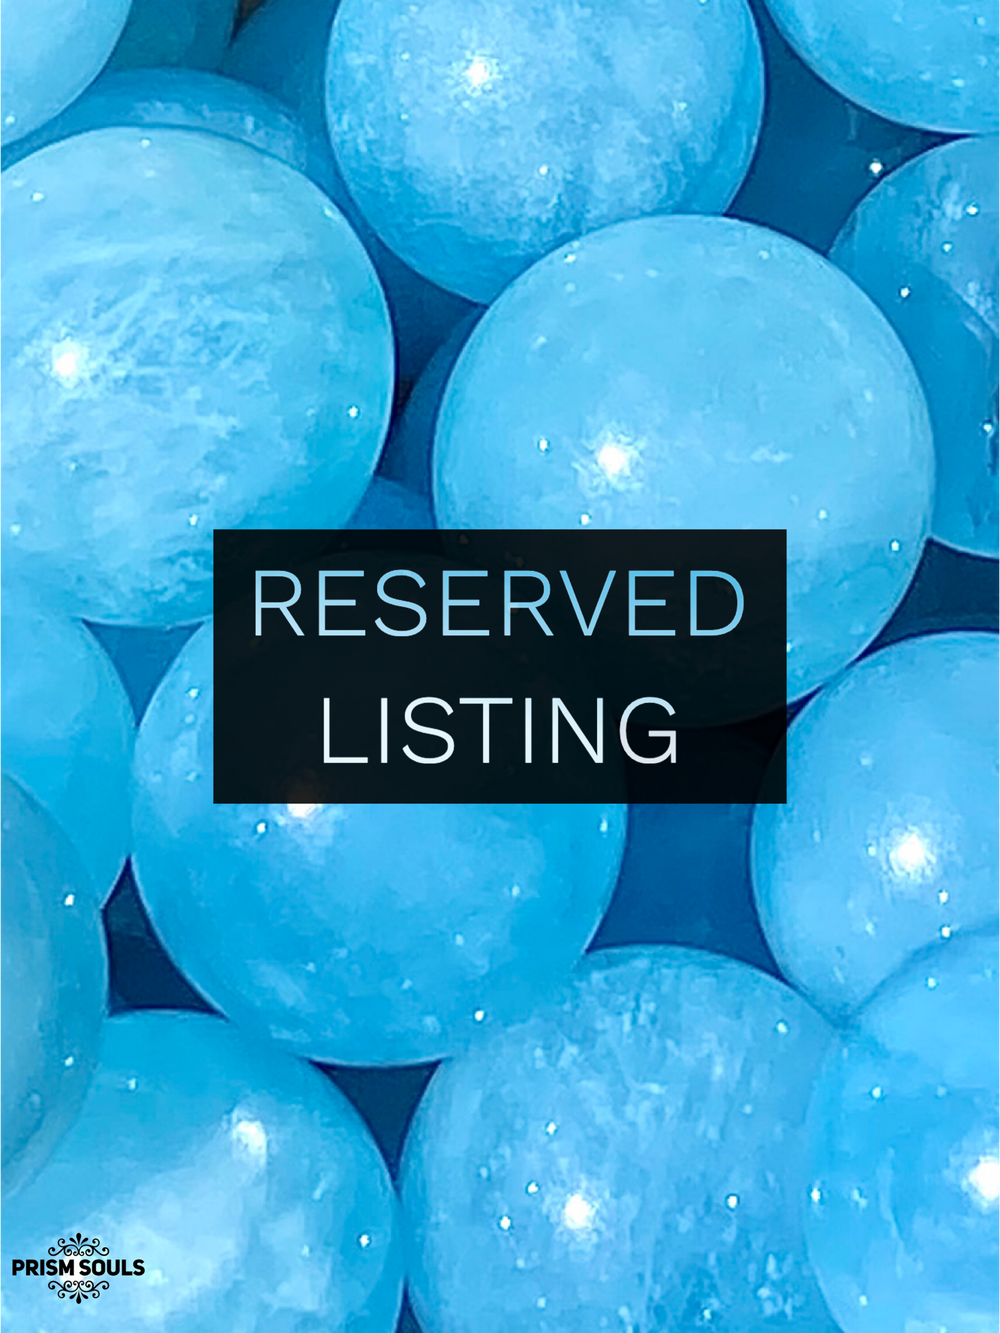 RESERVED LISTING - discover.thyself